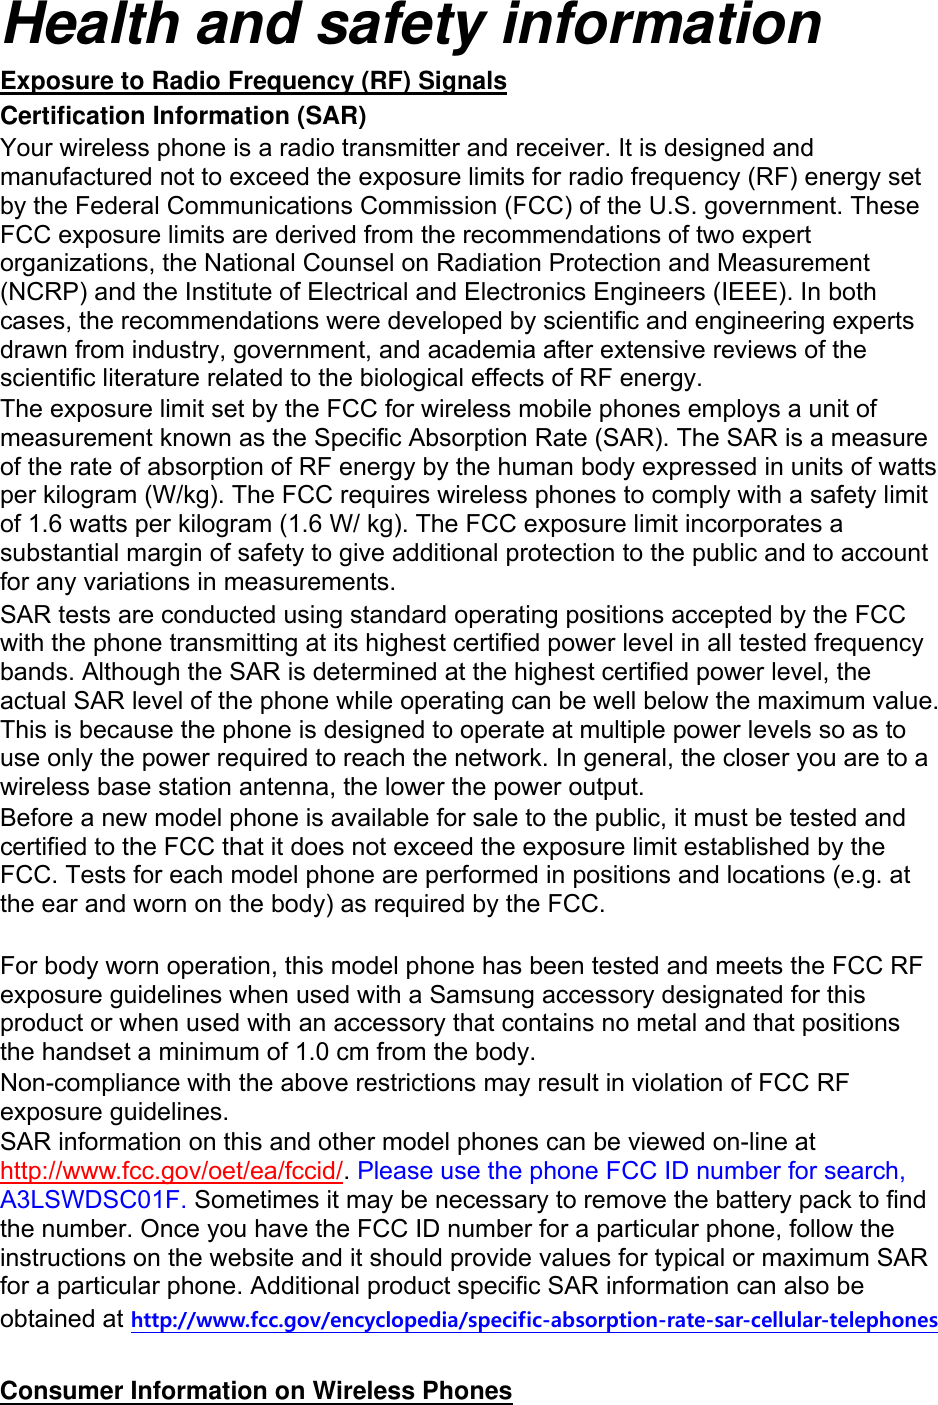 Health and safety information Exposure to Radio Frequency (RF) Signals Certification Information (SAR) Your wireless phone is a radio transmitter and receiver. It is designed and manufactured not to exceed the exposure limits for radio frequency (RF) energy set by the Federal Communications Commission (FCC) of the U.S. government. These FCC exposure limits are derived from the recommendations of two expert organizations, the National Counsel on Radiation Protection and Measurement (NCRP) and the Institute of Electrical and Electronics Engineers (IEEE). In both cases, the recommendations were developed by scientific and engineering experts drawn from industry, government, and academia after extensive reviews of the scientific literature related to the biological effects of RF energy. The exposure limit set by the FCC for wireless mobile phones employs a unit of measurement known as the Specific Absorption Rate (SAR). The SAR is a measure of the rate of absorption of RF energy by the human body expressed in units of watts per kilogram (W/kg). The FCC requires wireless phones to comply with a safety limit of 1.6 watts per kilogram (1.6 W/ kg). The FCC exposure limit incorporates a substantial margin of safety to give additional protection to the public and to account for any variations in measurements. SAR tests are conducted using standard operating positions accepted by the FCC with the phone transmitting at its highest certified power level in all tested frequency bands. Although the SAR is determined at the highest certified power level, the actual SAR level of the phone while operating can be well below the maximum value. This is because the phone is designed to operate at multiple power levels so as to use only the power required to reach the network. In general, the closer you are to a wireless base station antenna, the lower the power output. Before a new model phone is available for sale to the public, it must be tested and certified to the FCC that it does not exceed the exposure limit established by the FCC. Tests for each model phone are performed in positions and locations (e.g. at the ear and worn on the body) as required by the FCC.      For body worn operation, this model phone has been tested and meets the FCC RF exposure guidelines when used with a Samsung accessory designated for this product or when used with an accessory that contains no metal and that positions the handset a minimum of 1.0 cm from the body.   Non-compliance with the above restrictions may result in violation of FCC RF exposure guidelines. SAR information on this and other model phones can be viewed on-line at http://www.fcc.gov/oet/ea/fccid/. Please use the phone FCC ID number for search, A3LSWDSC01F. Sometimes it may be necessary to remove the battery pack to find the number. Once you have the FCC ID number for a particular phone, follow the instructions on the website and it should provide values for typical or maximum SAR for a particular phone. Additional product specific SAR information can also be obtained at http://www.fcc.gov/encyclopedia/specific-absorption-rate-sar-cellular-telephones  Consumer Information on Wireless Phones 